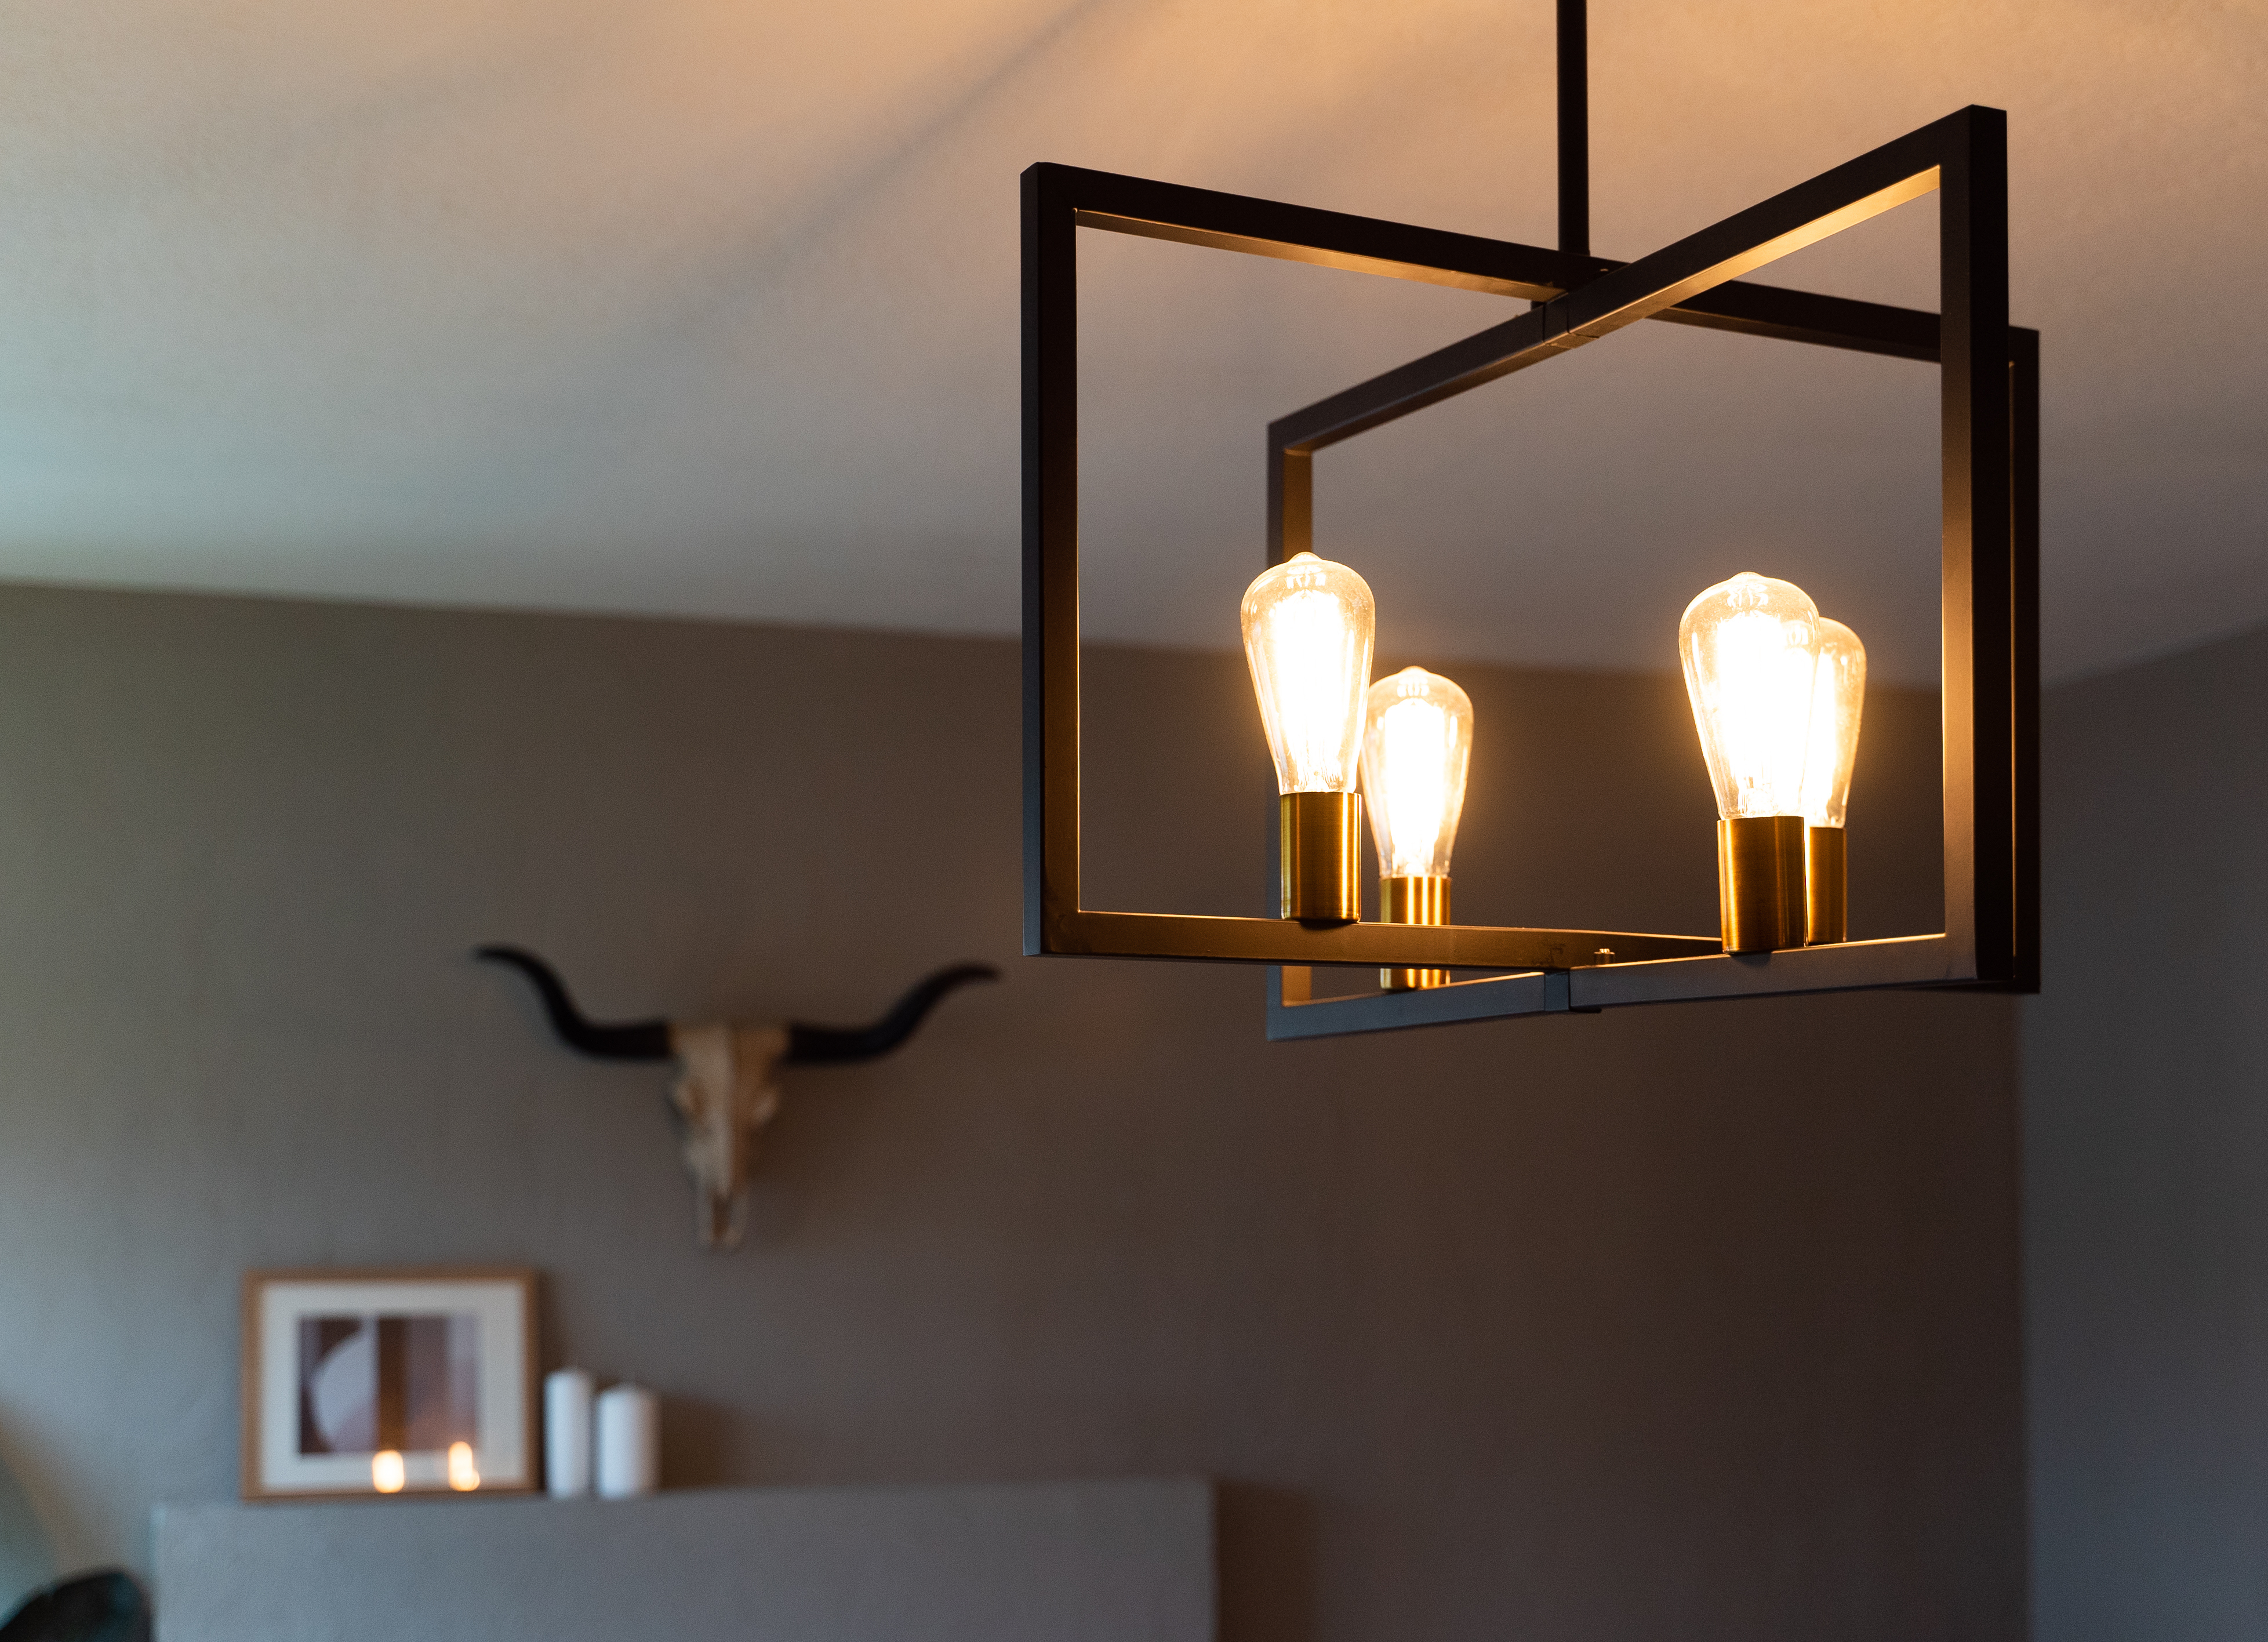 Modern chandelier with exposed bulbs hanging in a room, below a wall-mounted animal skull decor